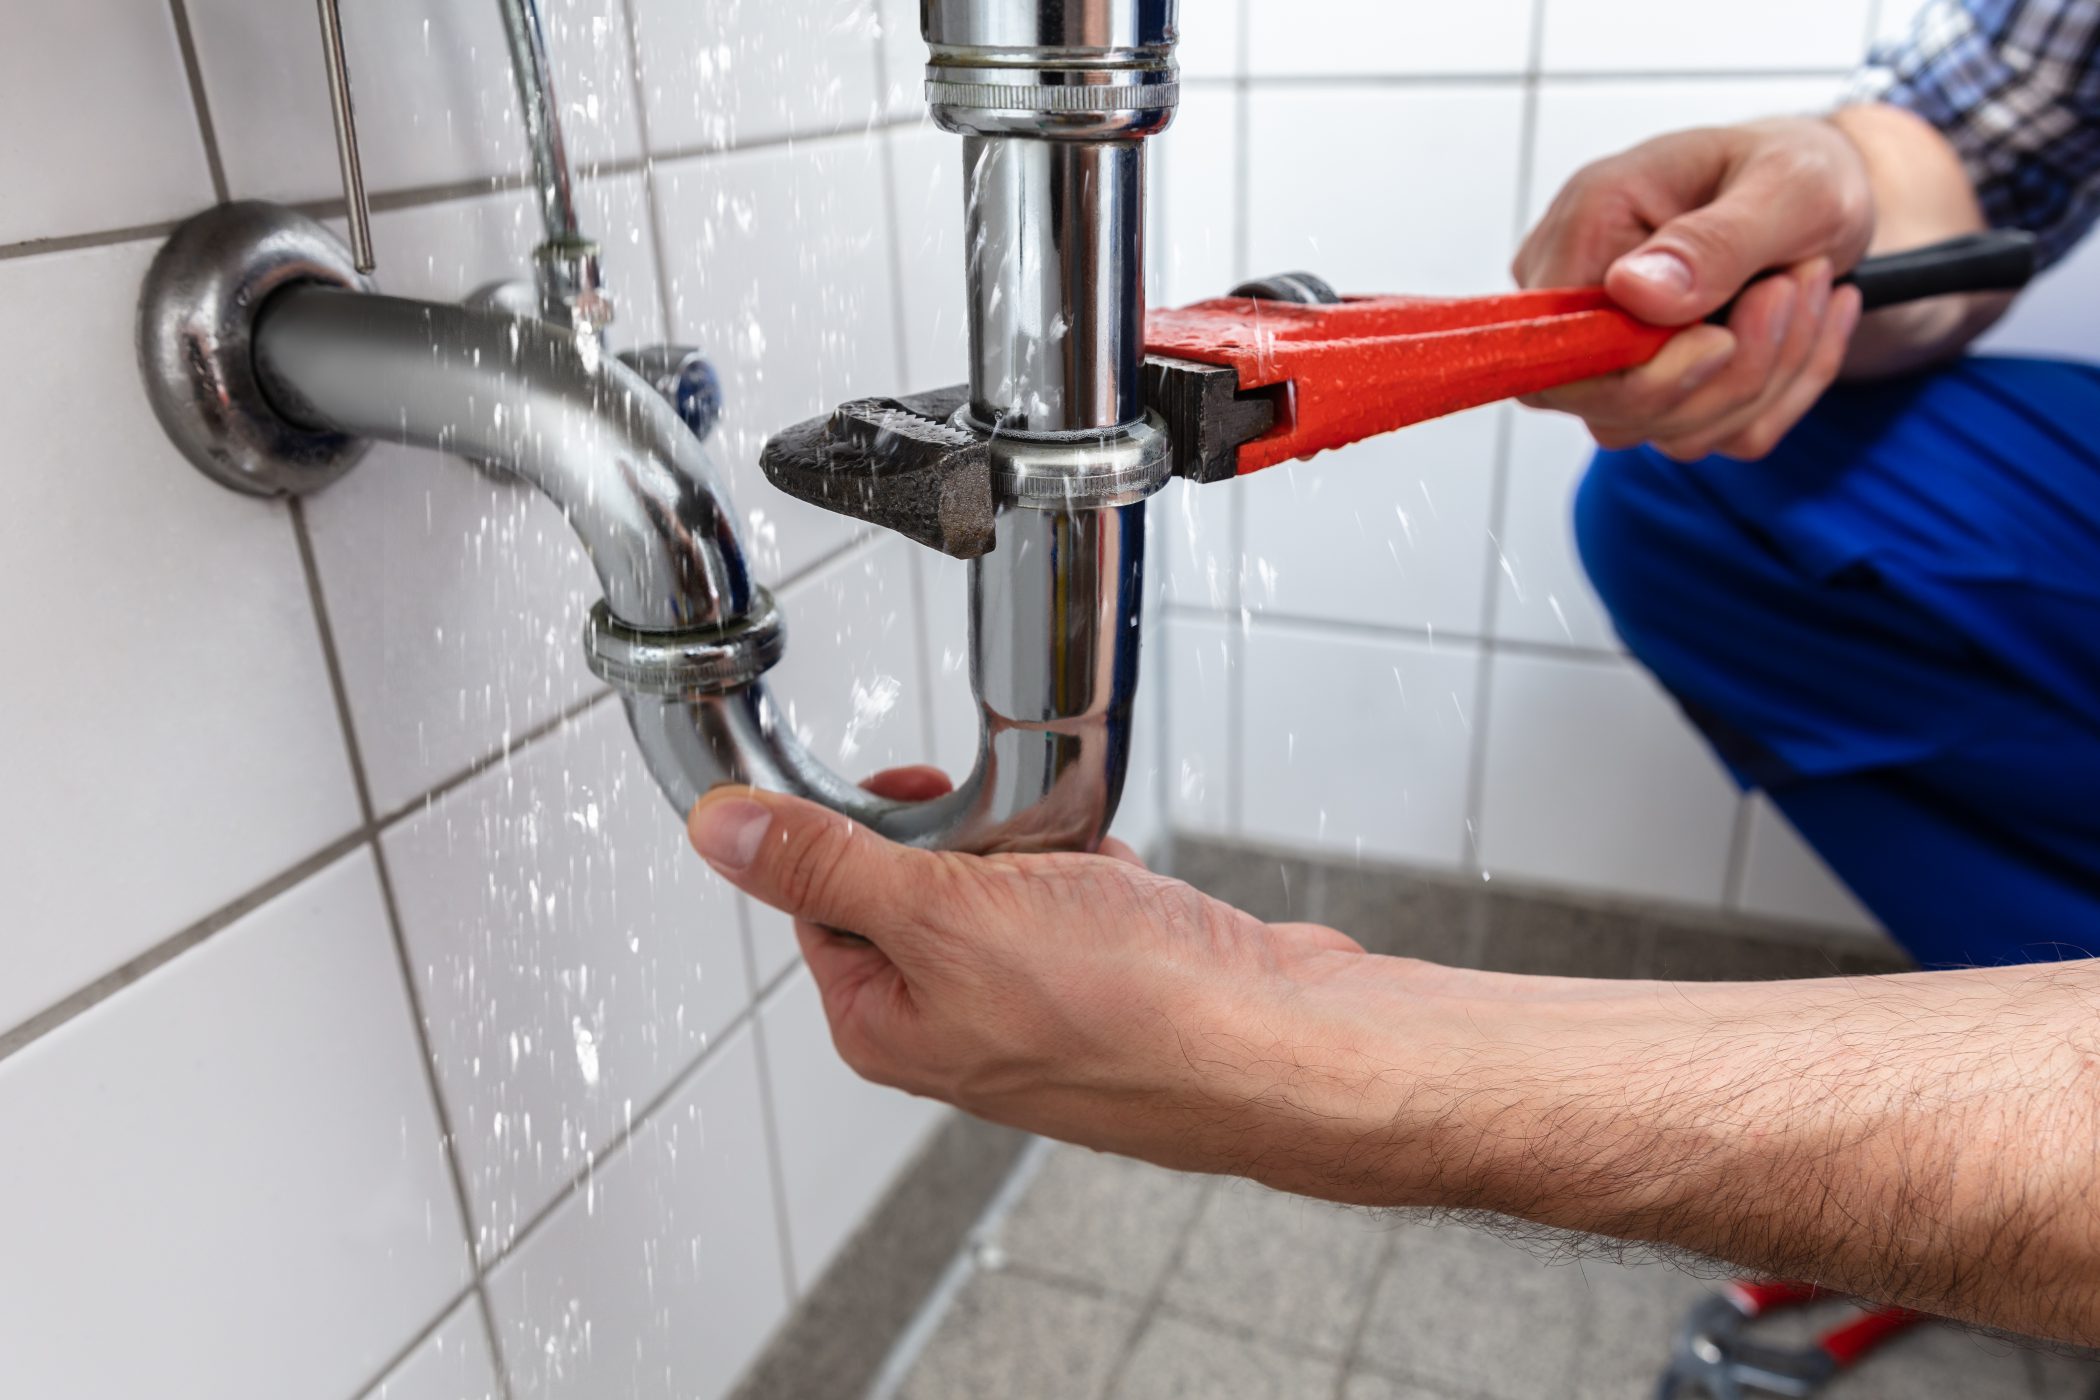 How to Detect Plumbing Leaks at your Home